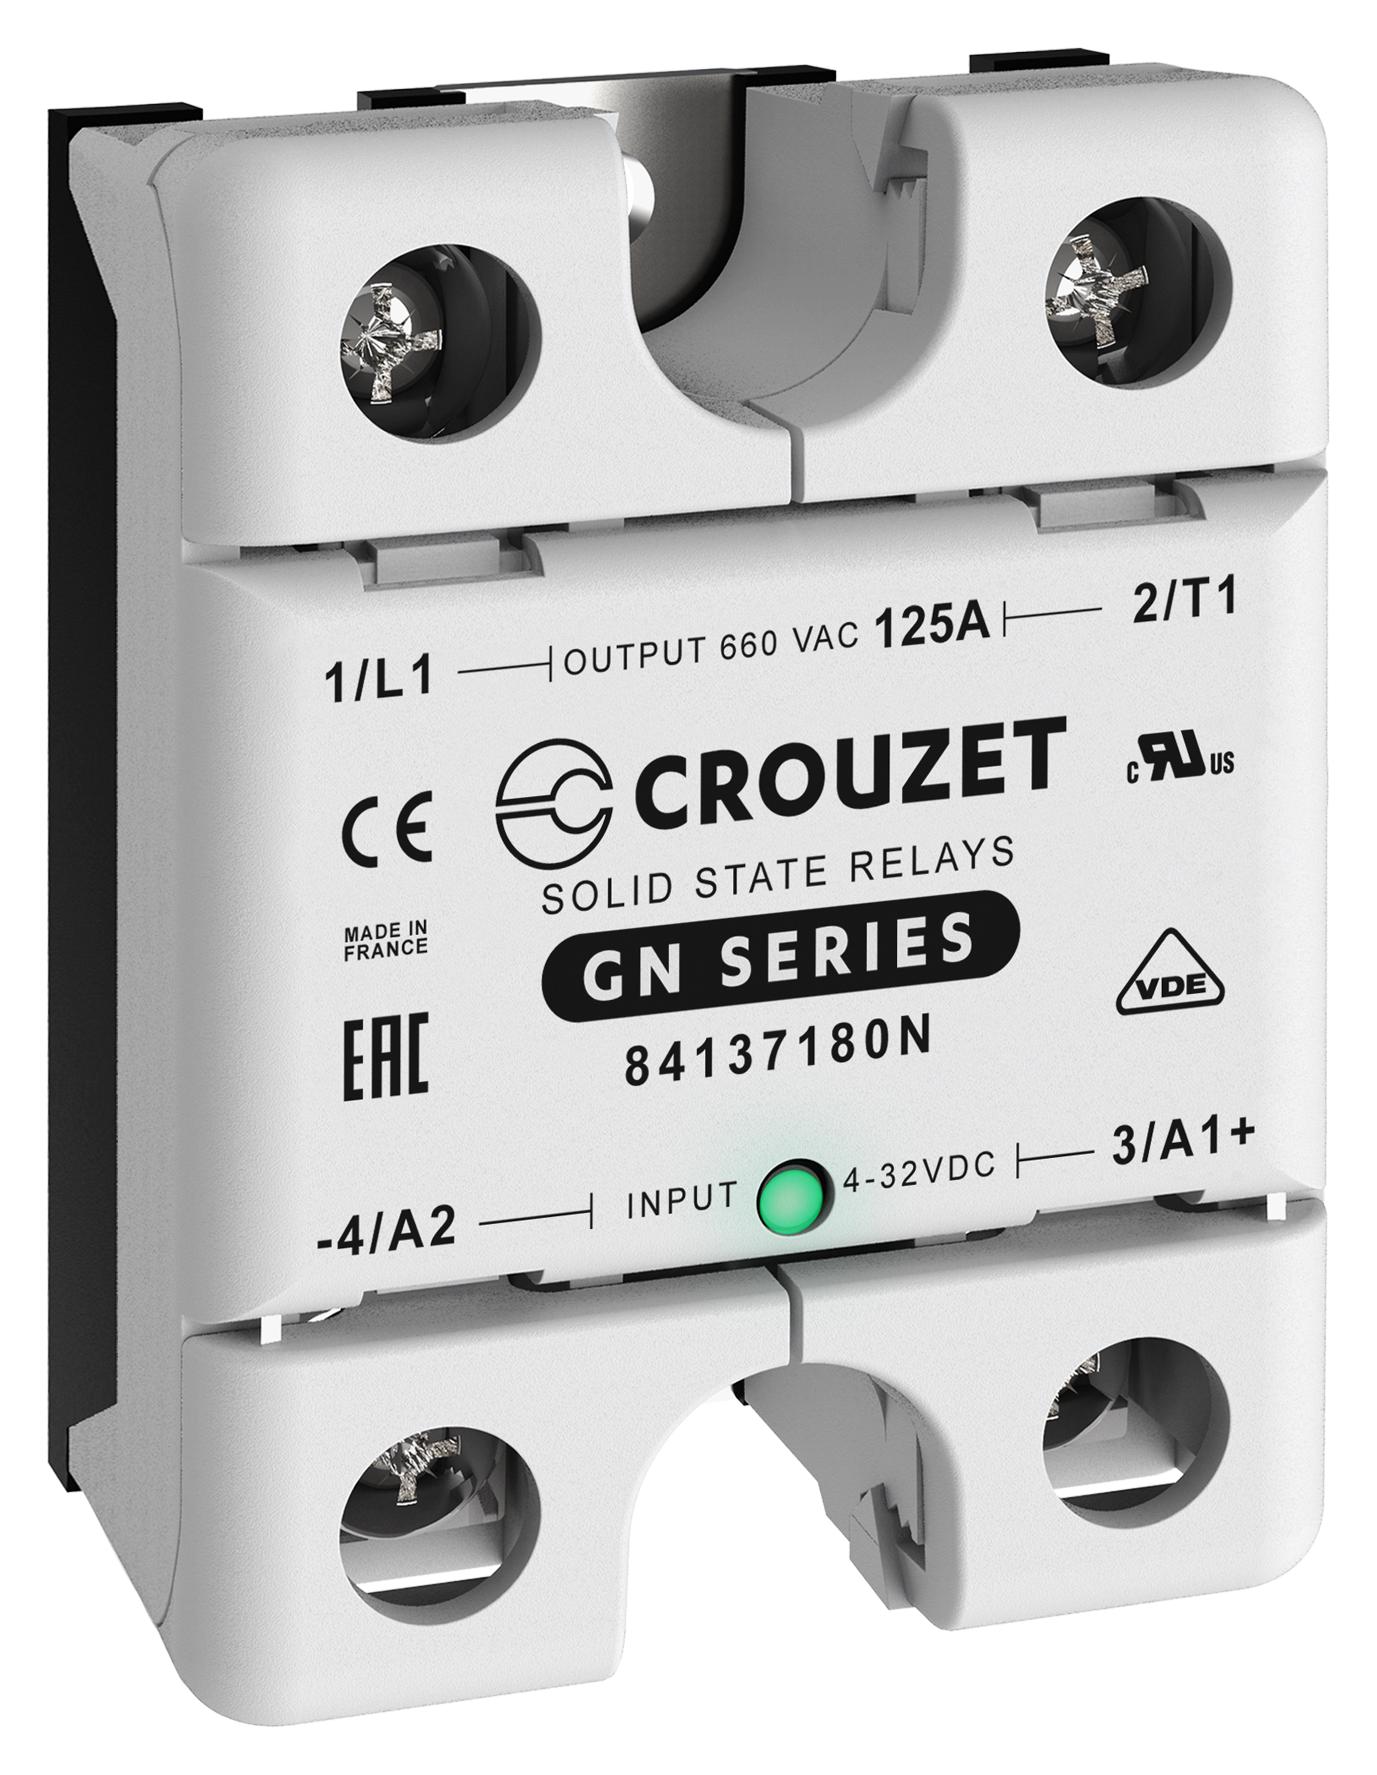 84137180N SOLID STATE RELAY, 125A, 48-660VAC/PANEL CROUZET